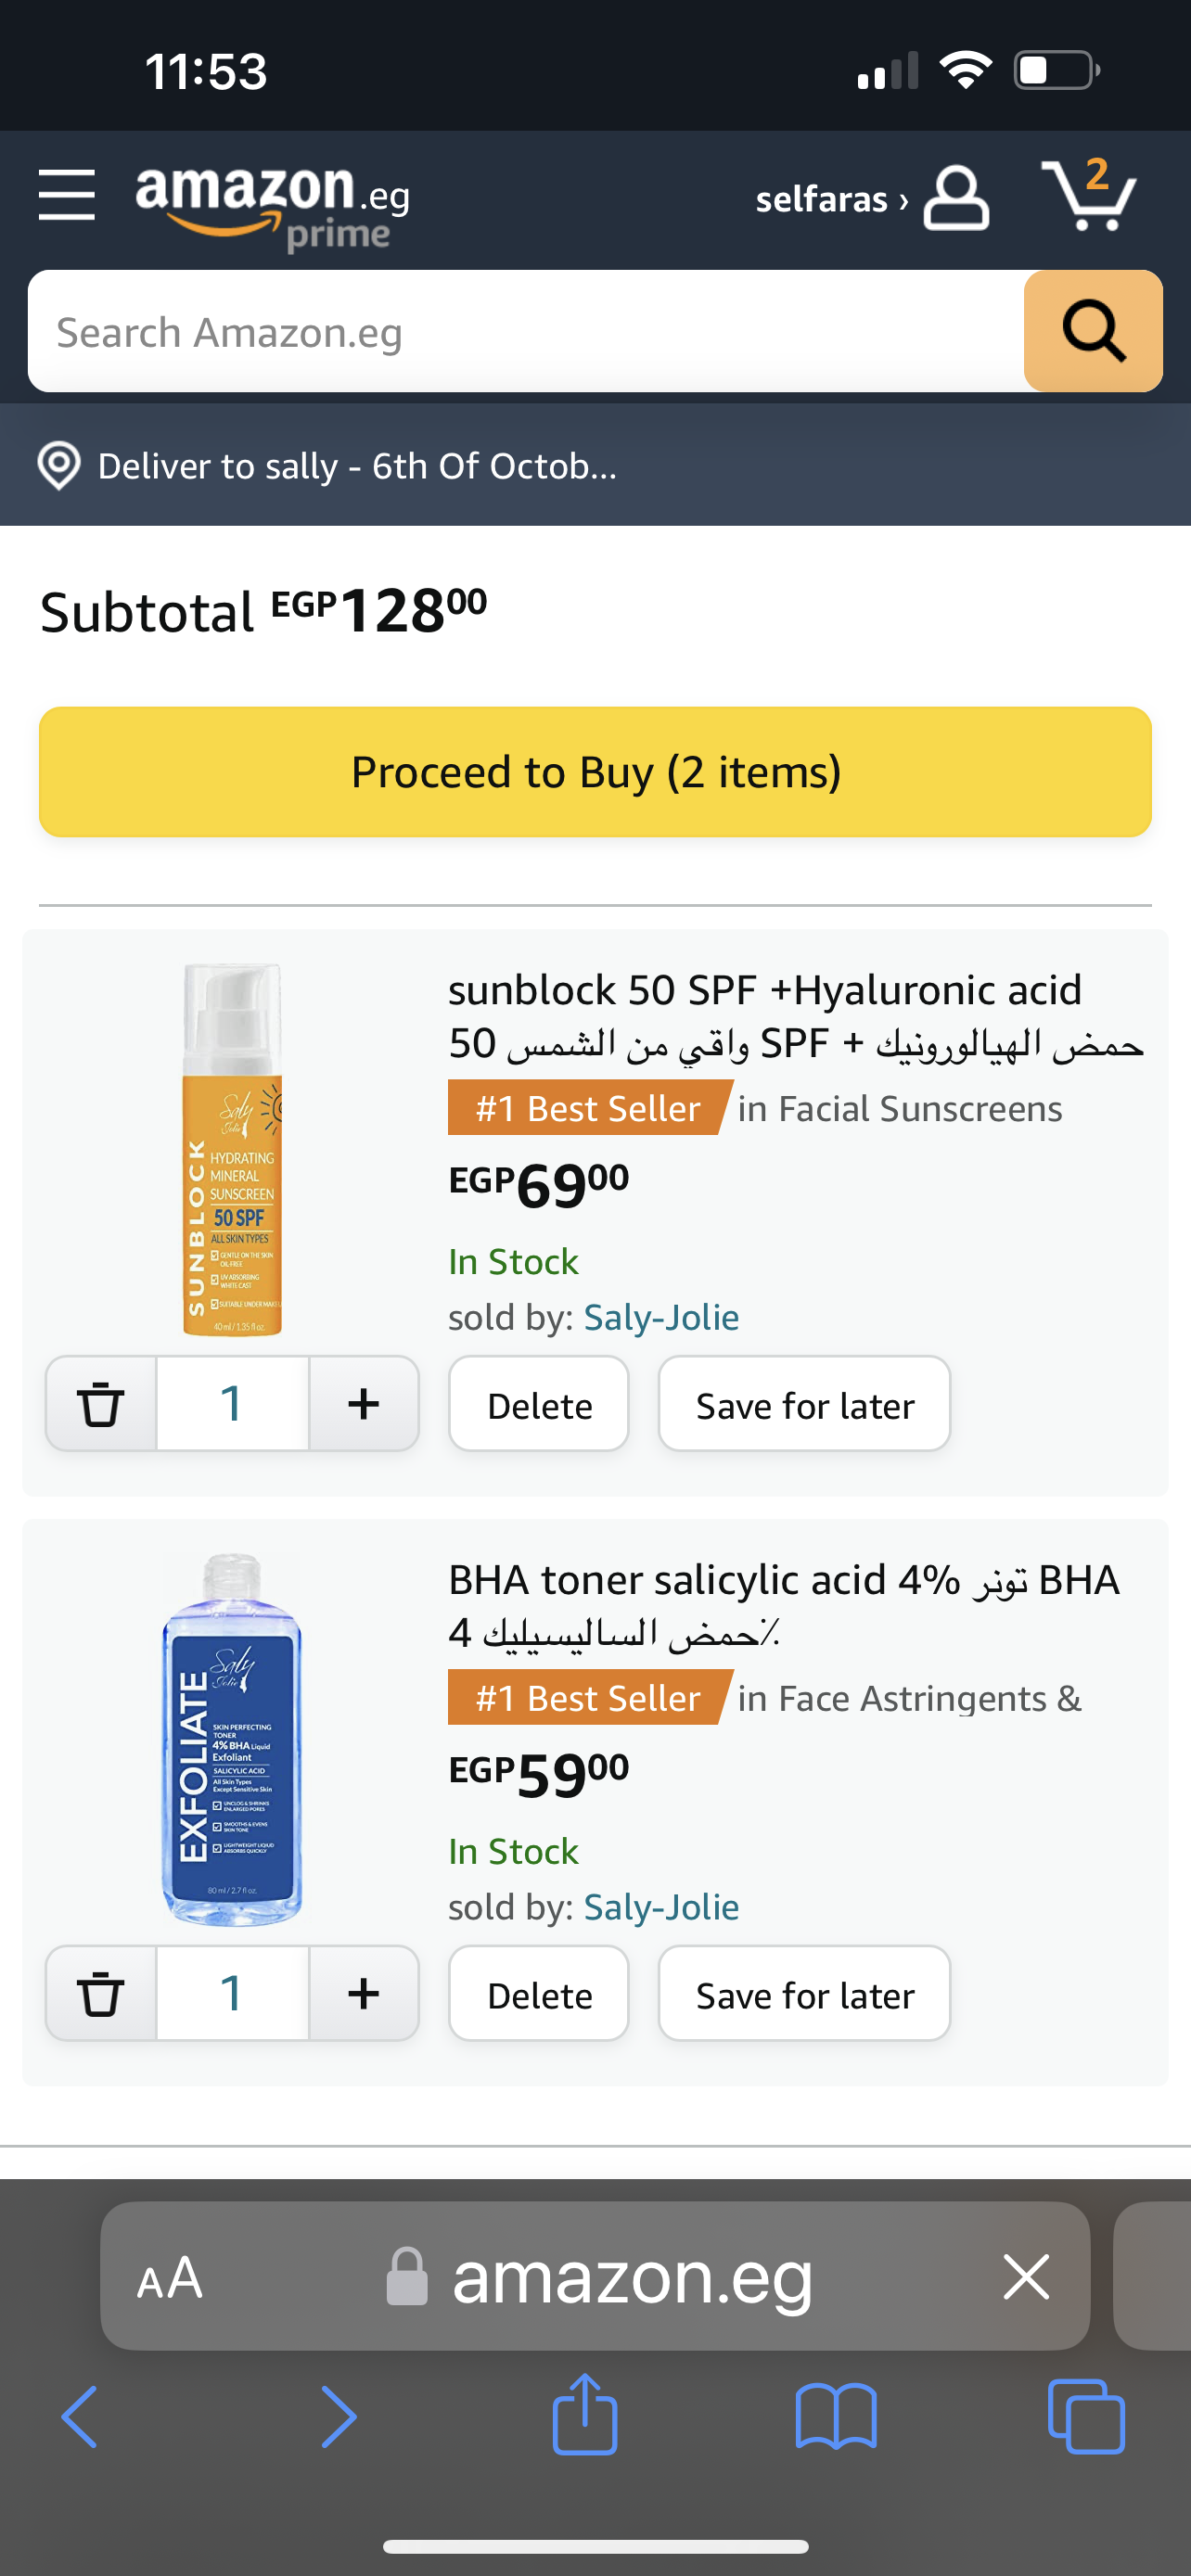 Sunblock 50 SPF 100% Mineral Sunscreen SPF 50 | Face Sunscreen with Zinc Oxide & Titanium Dioxide for All Skin Types | With Hyaluronic Acid, Niacinamide, and Ceramides